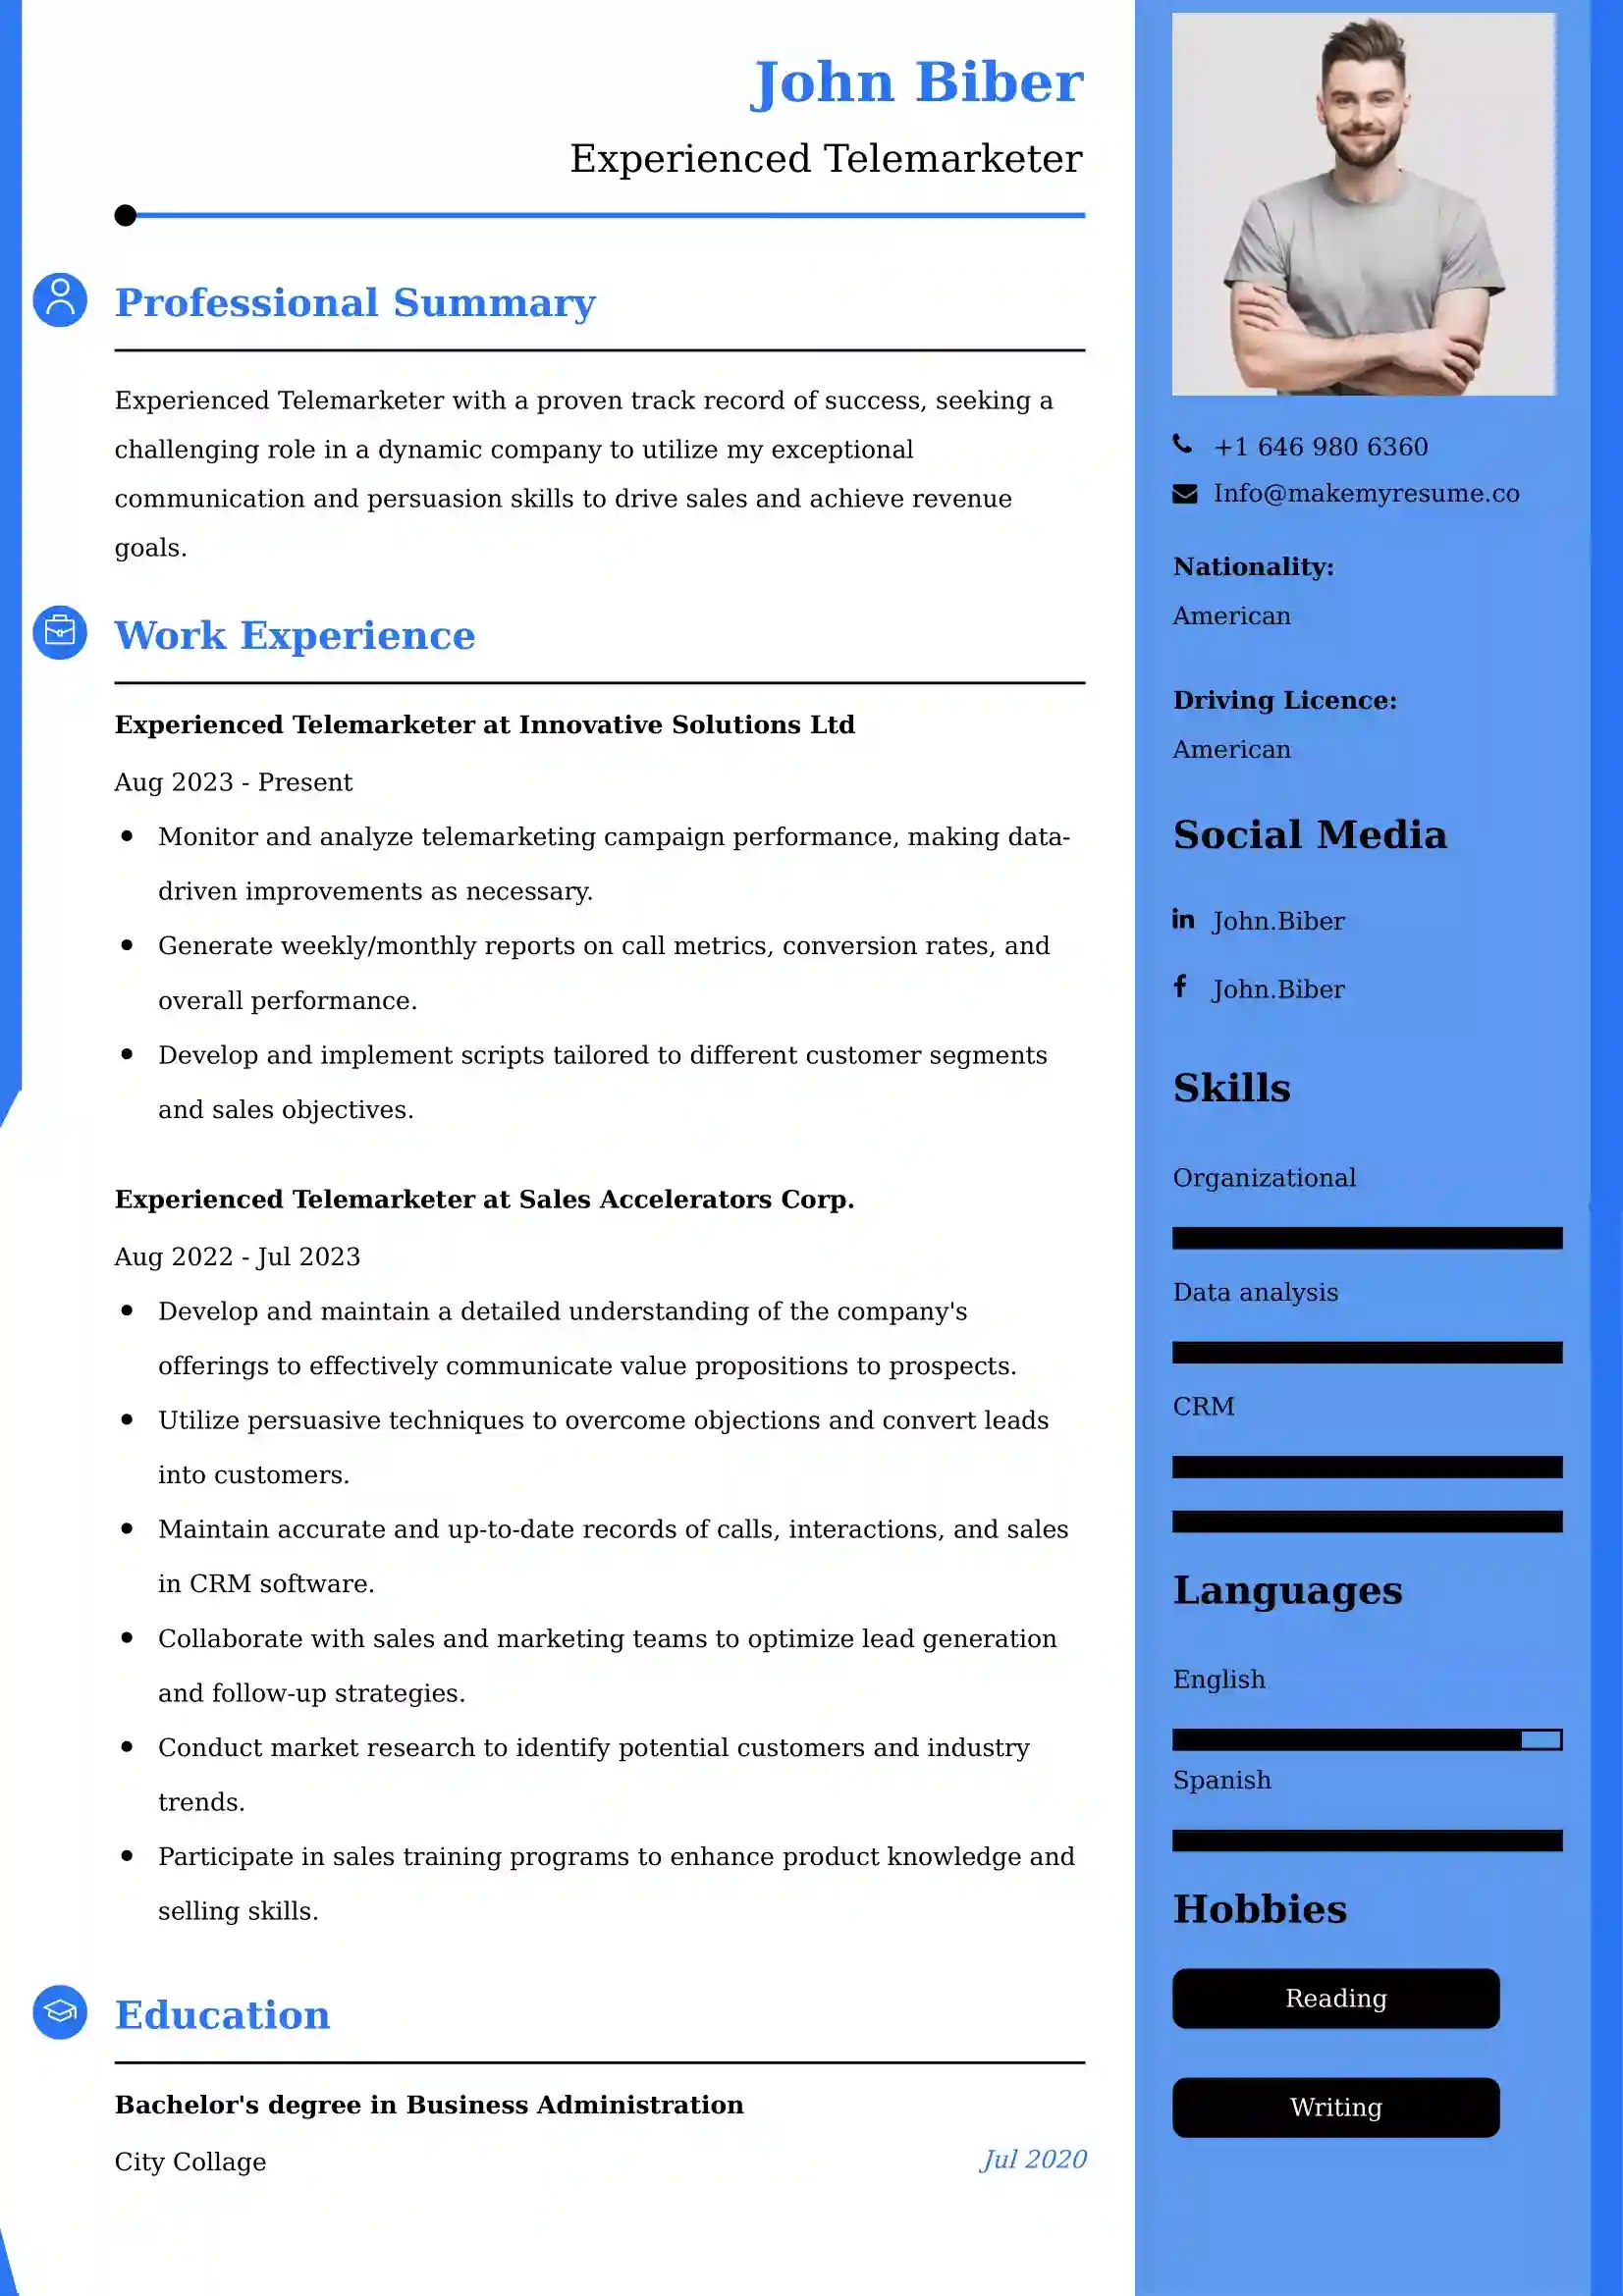 Experienced Telemarketer Resume Examples - UK Format, Latest Template.